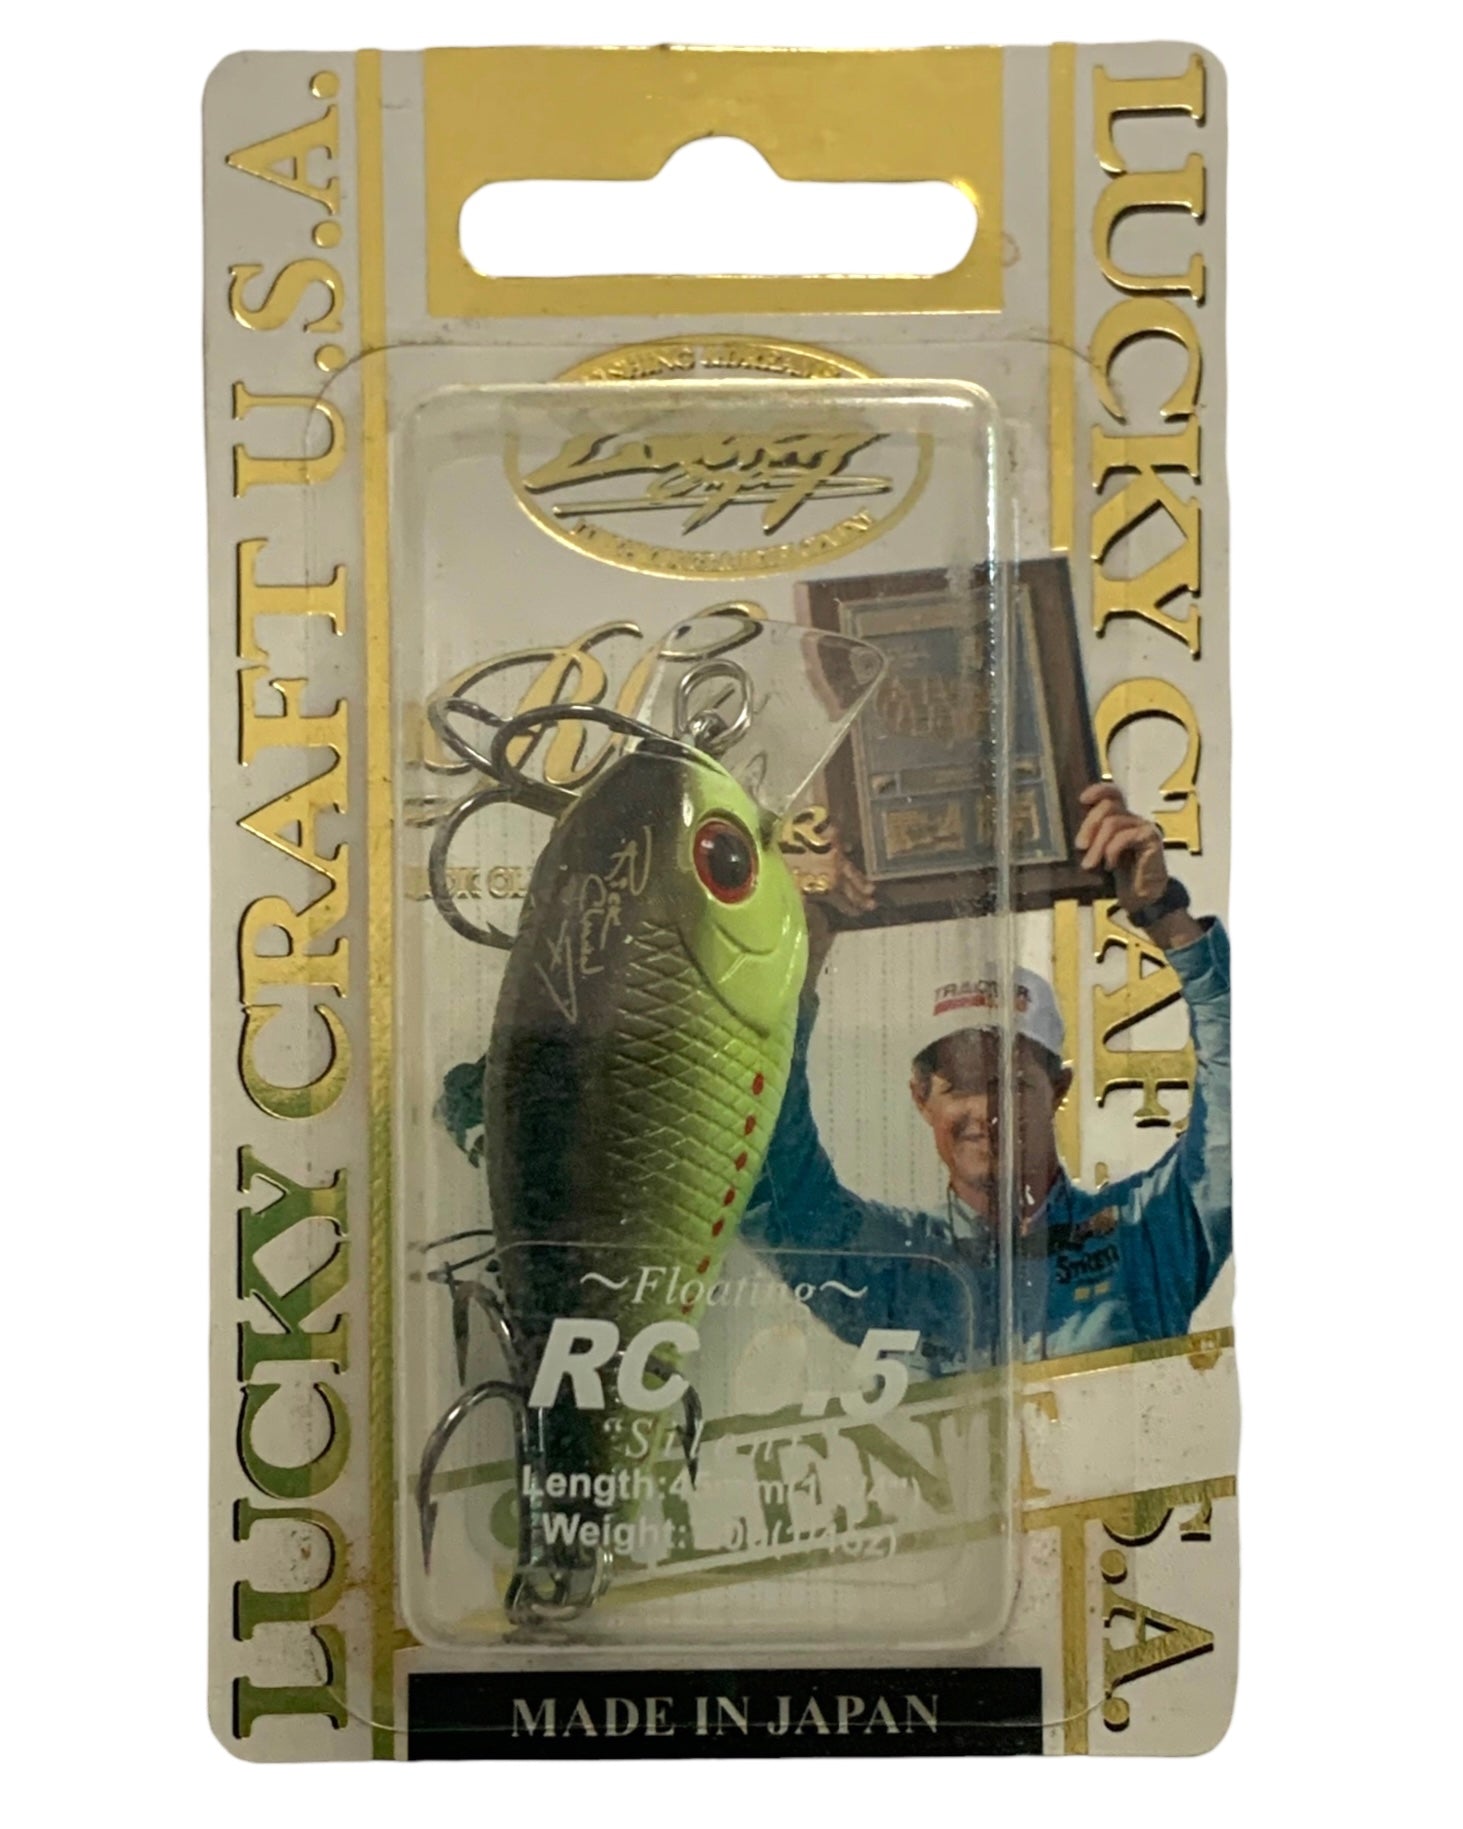 LUCKY CRAFT RC 0.5 CRANK Silent Fishing Lure • CHART PERCH – Toad Tackle